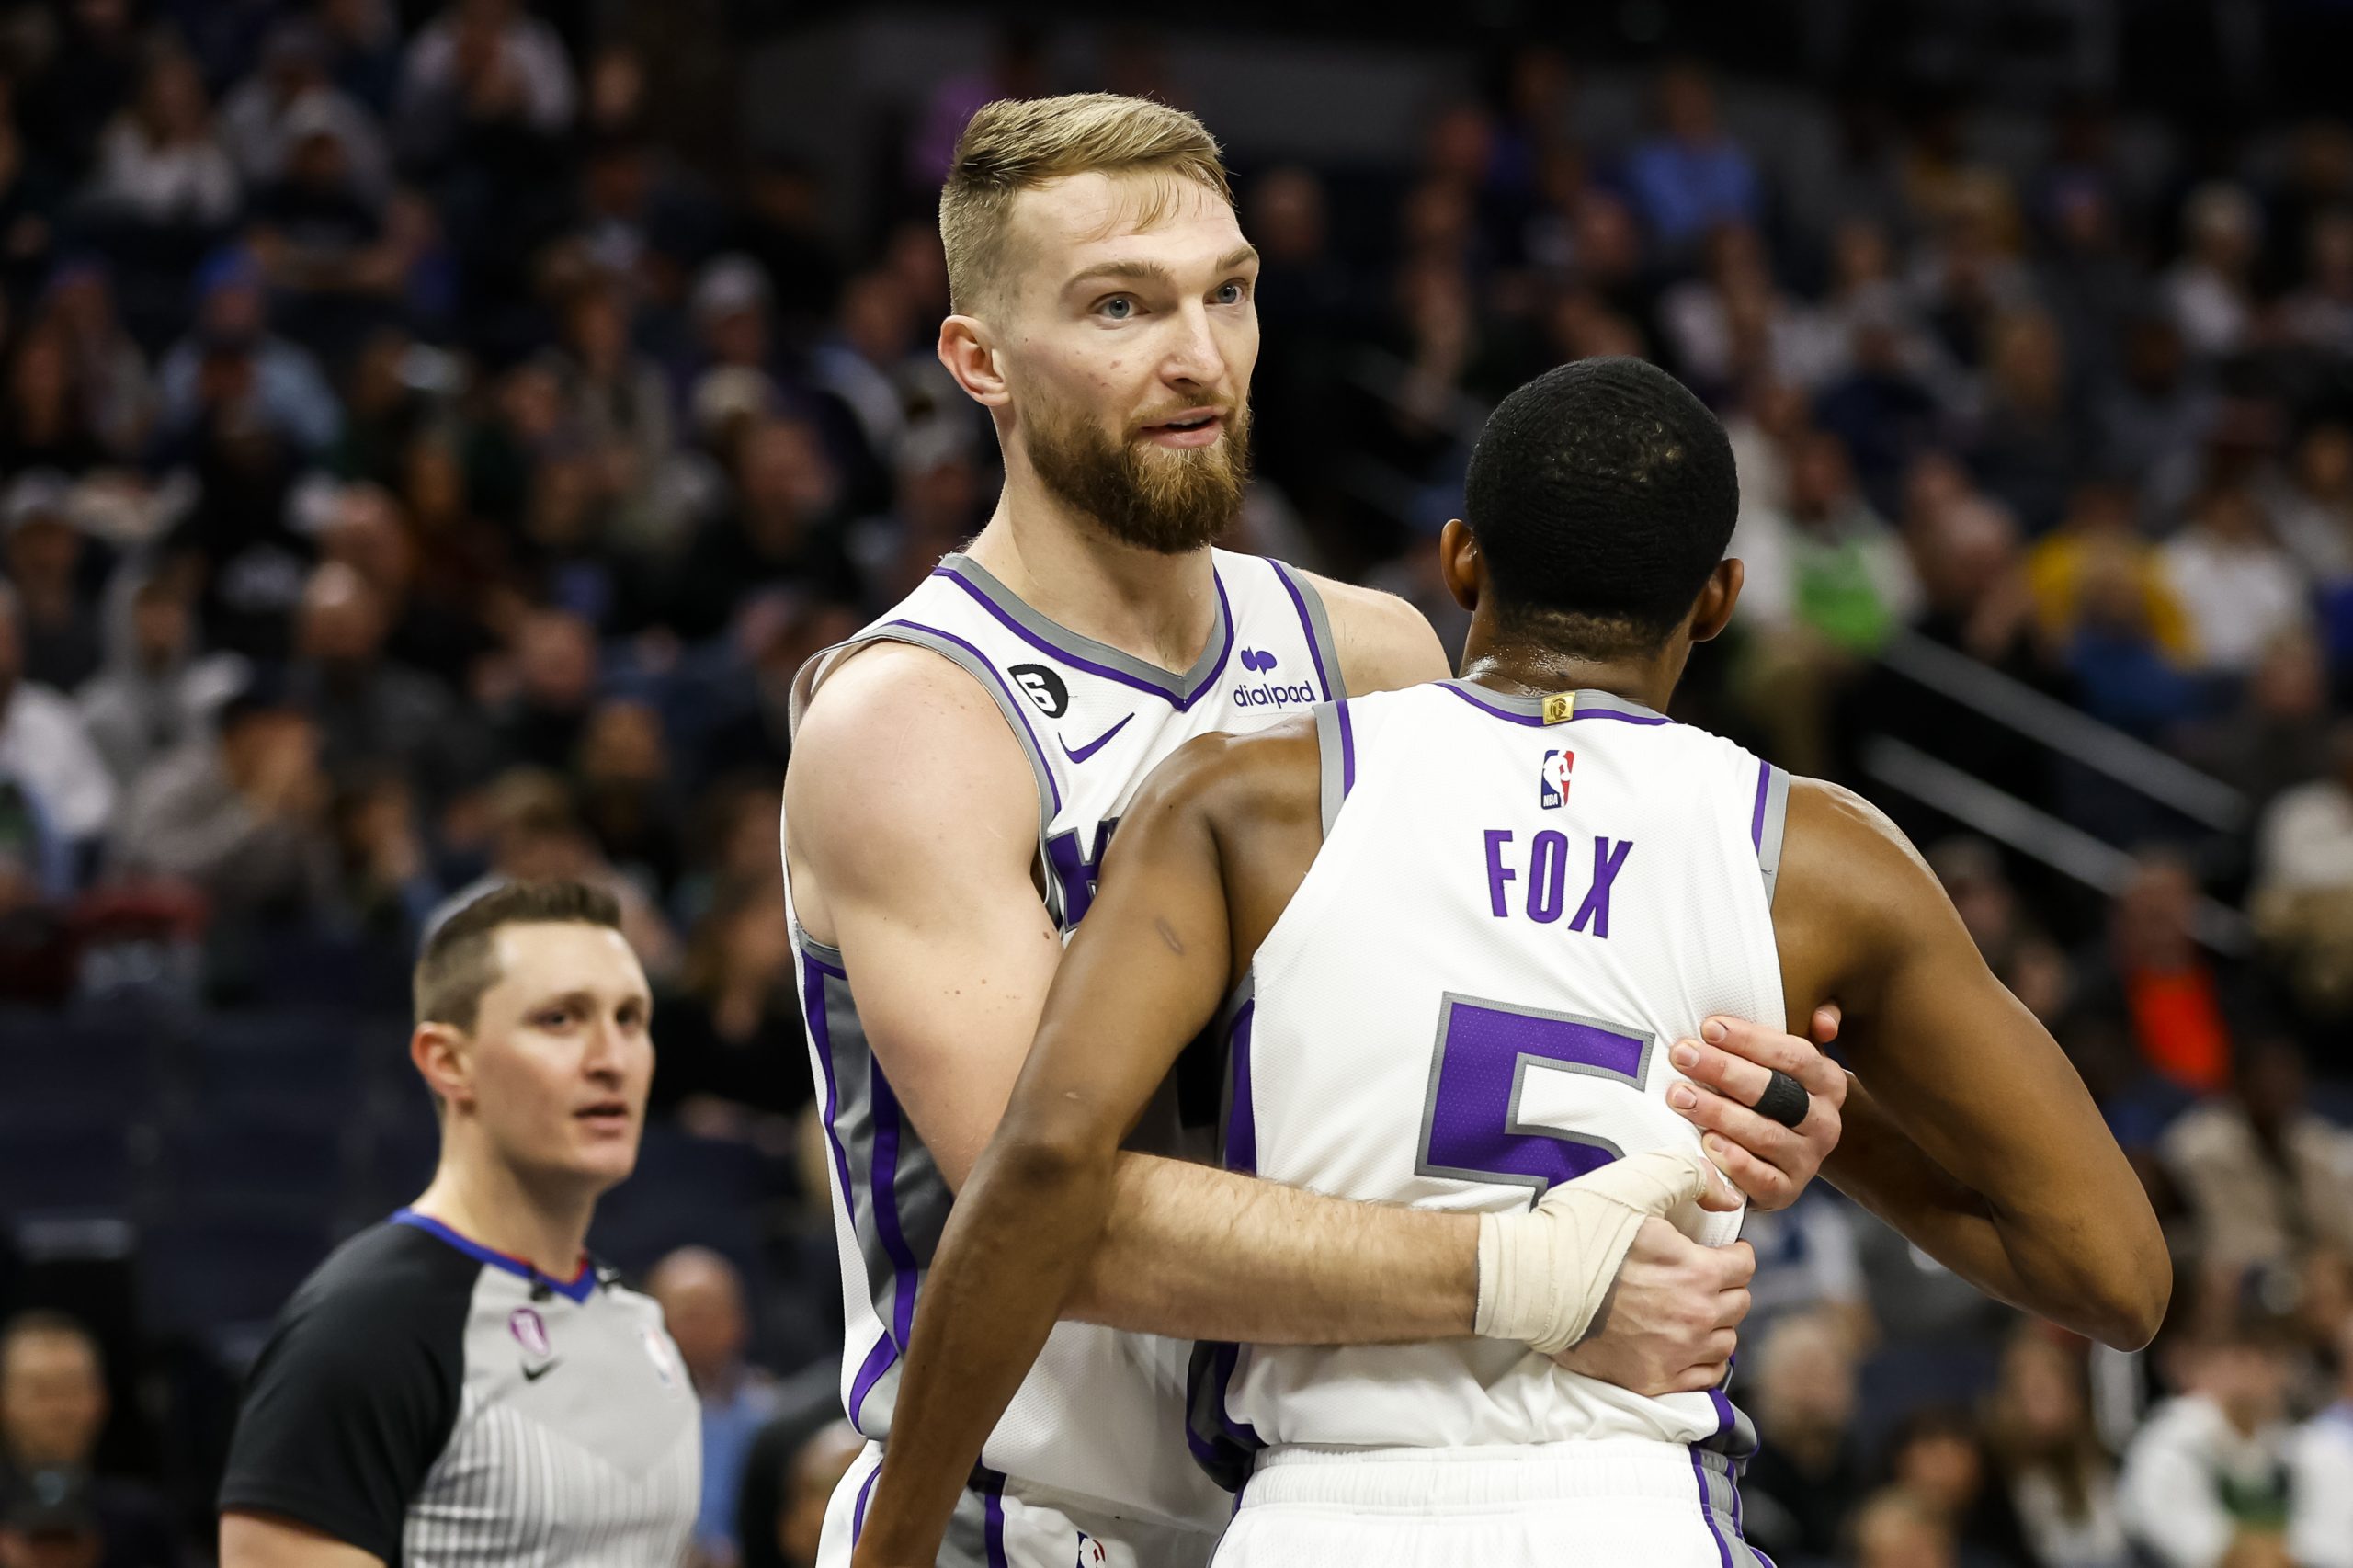 The Sacramento Kings Domantas Sabonis holds back De'Aaron Fox as he reacts to a foul call in the fo...